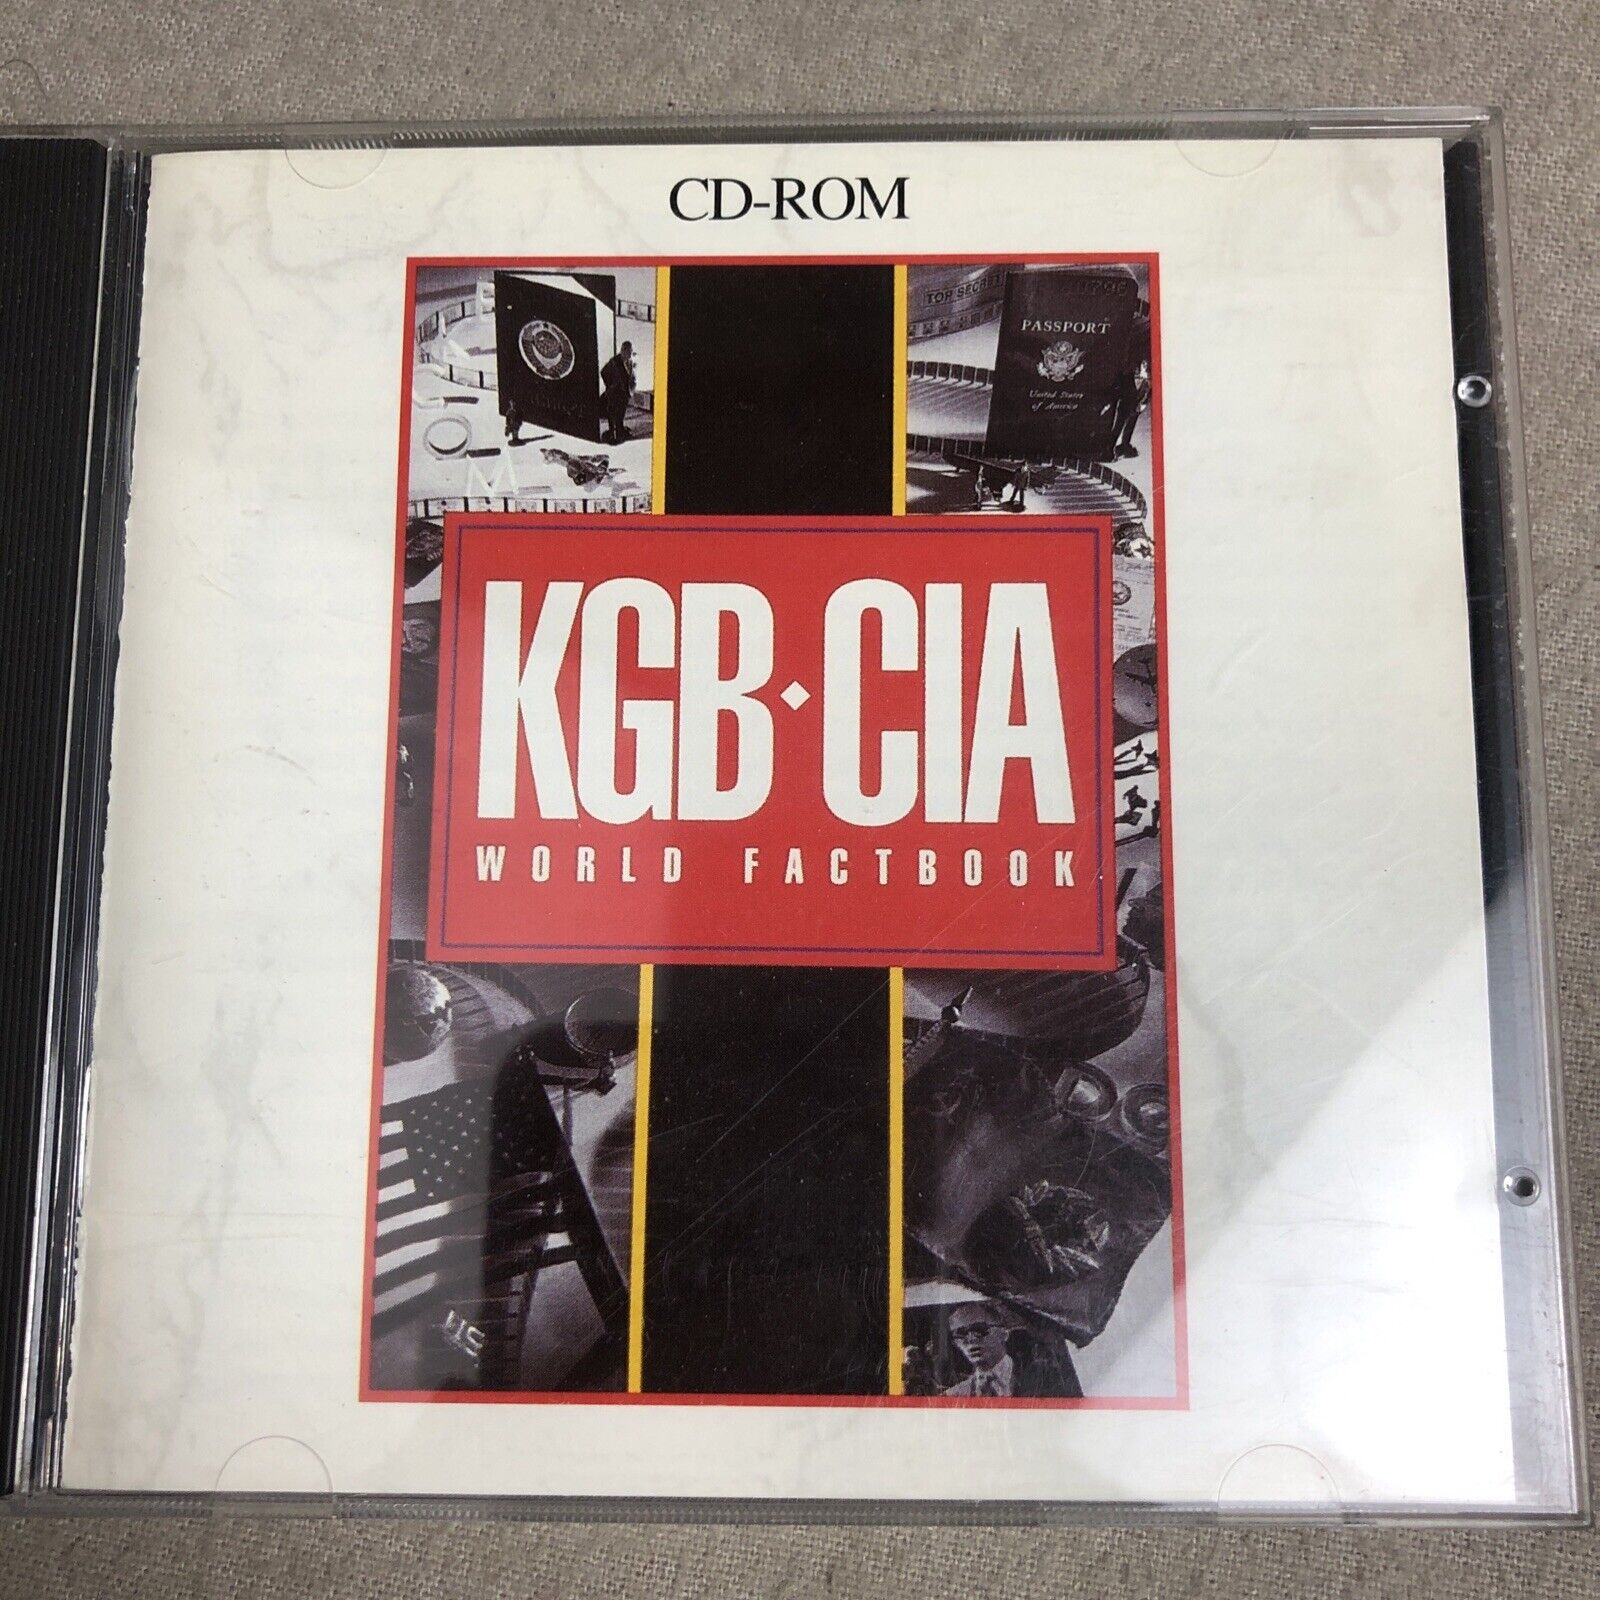 KGB-CIA World Factbook CD-ROM for DOS, Windows 3.1, Compton’s Most